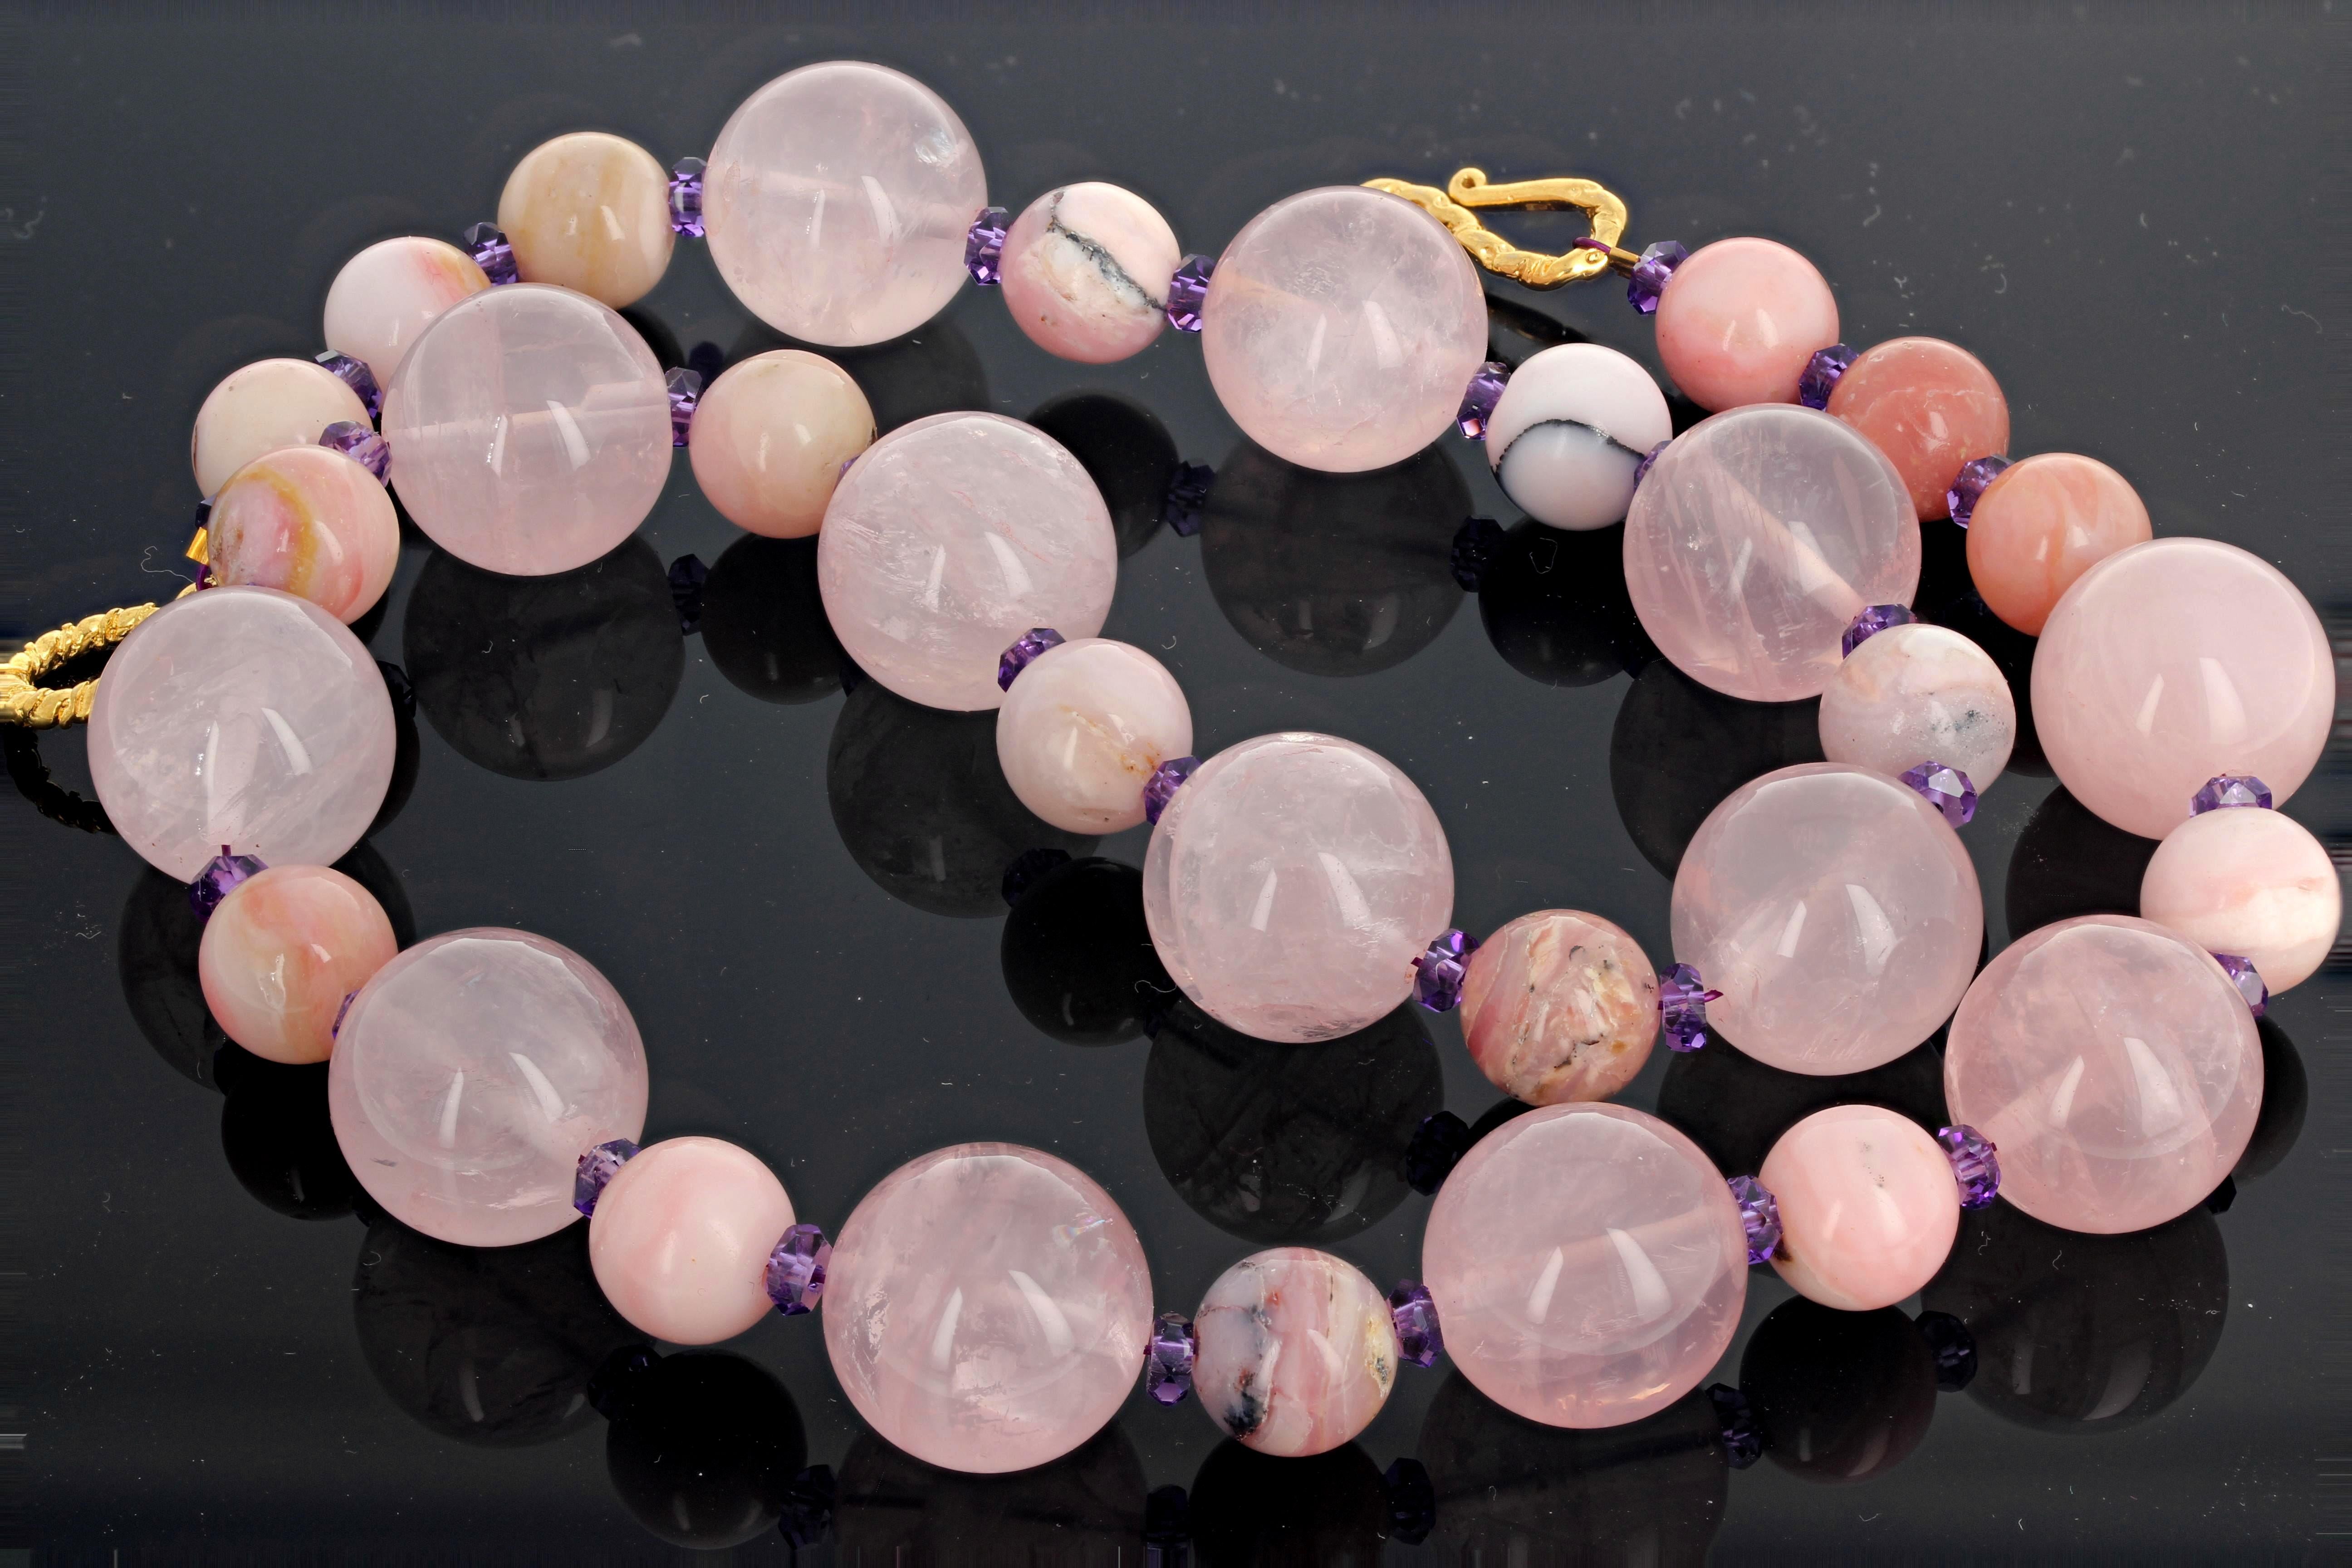 Natural glowing lively Rose Quartz (16 mm) is adorned with natural rare pink Peruvian Opals and sparkling purple Amethyst accents set with a gold plated clasp and is 19 inches long.  This goes elegantly from daytime to evening.  